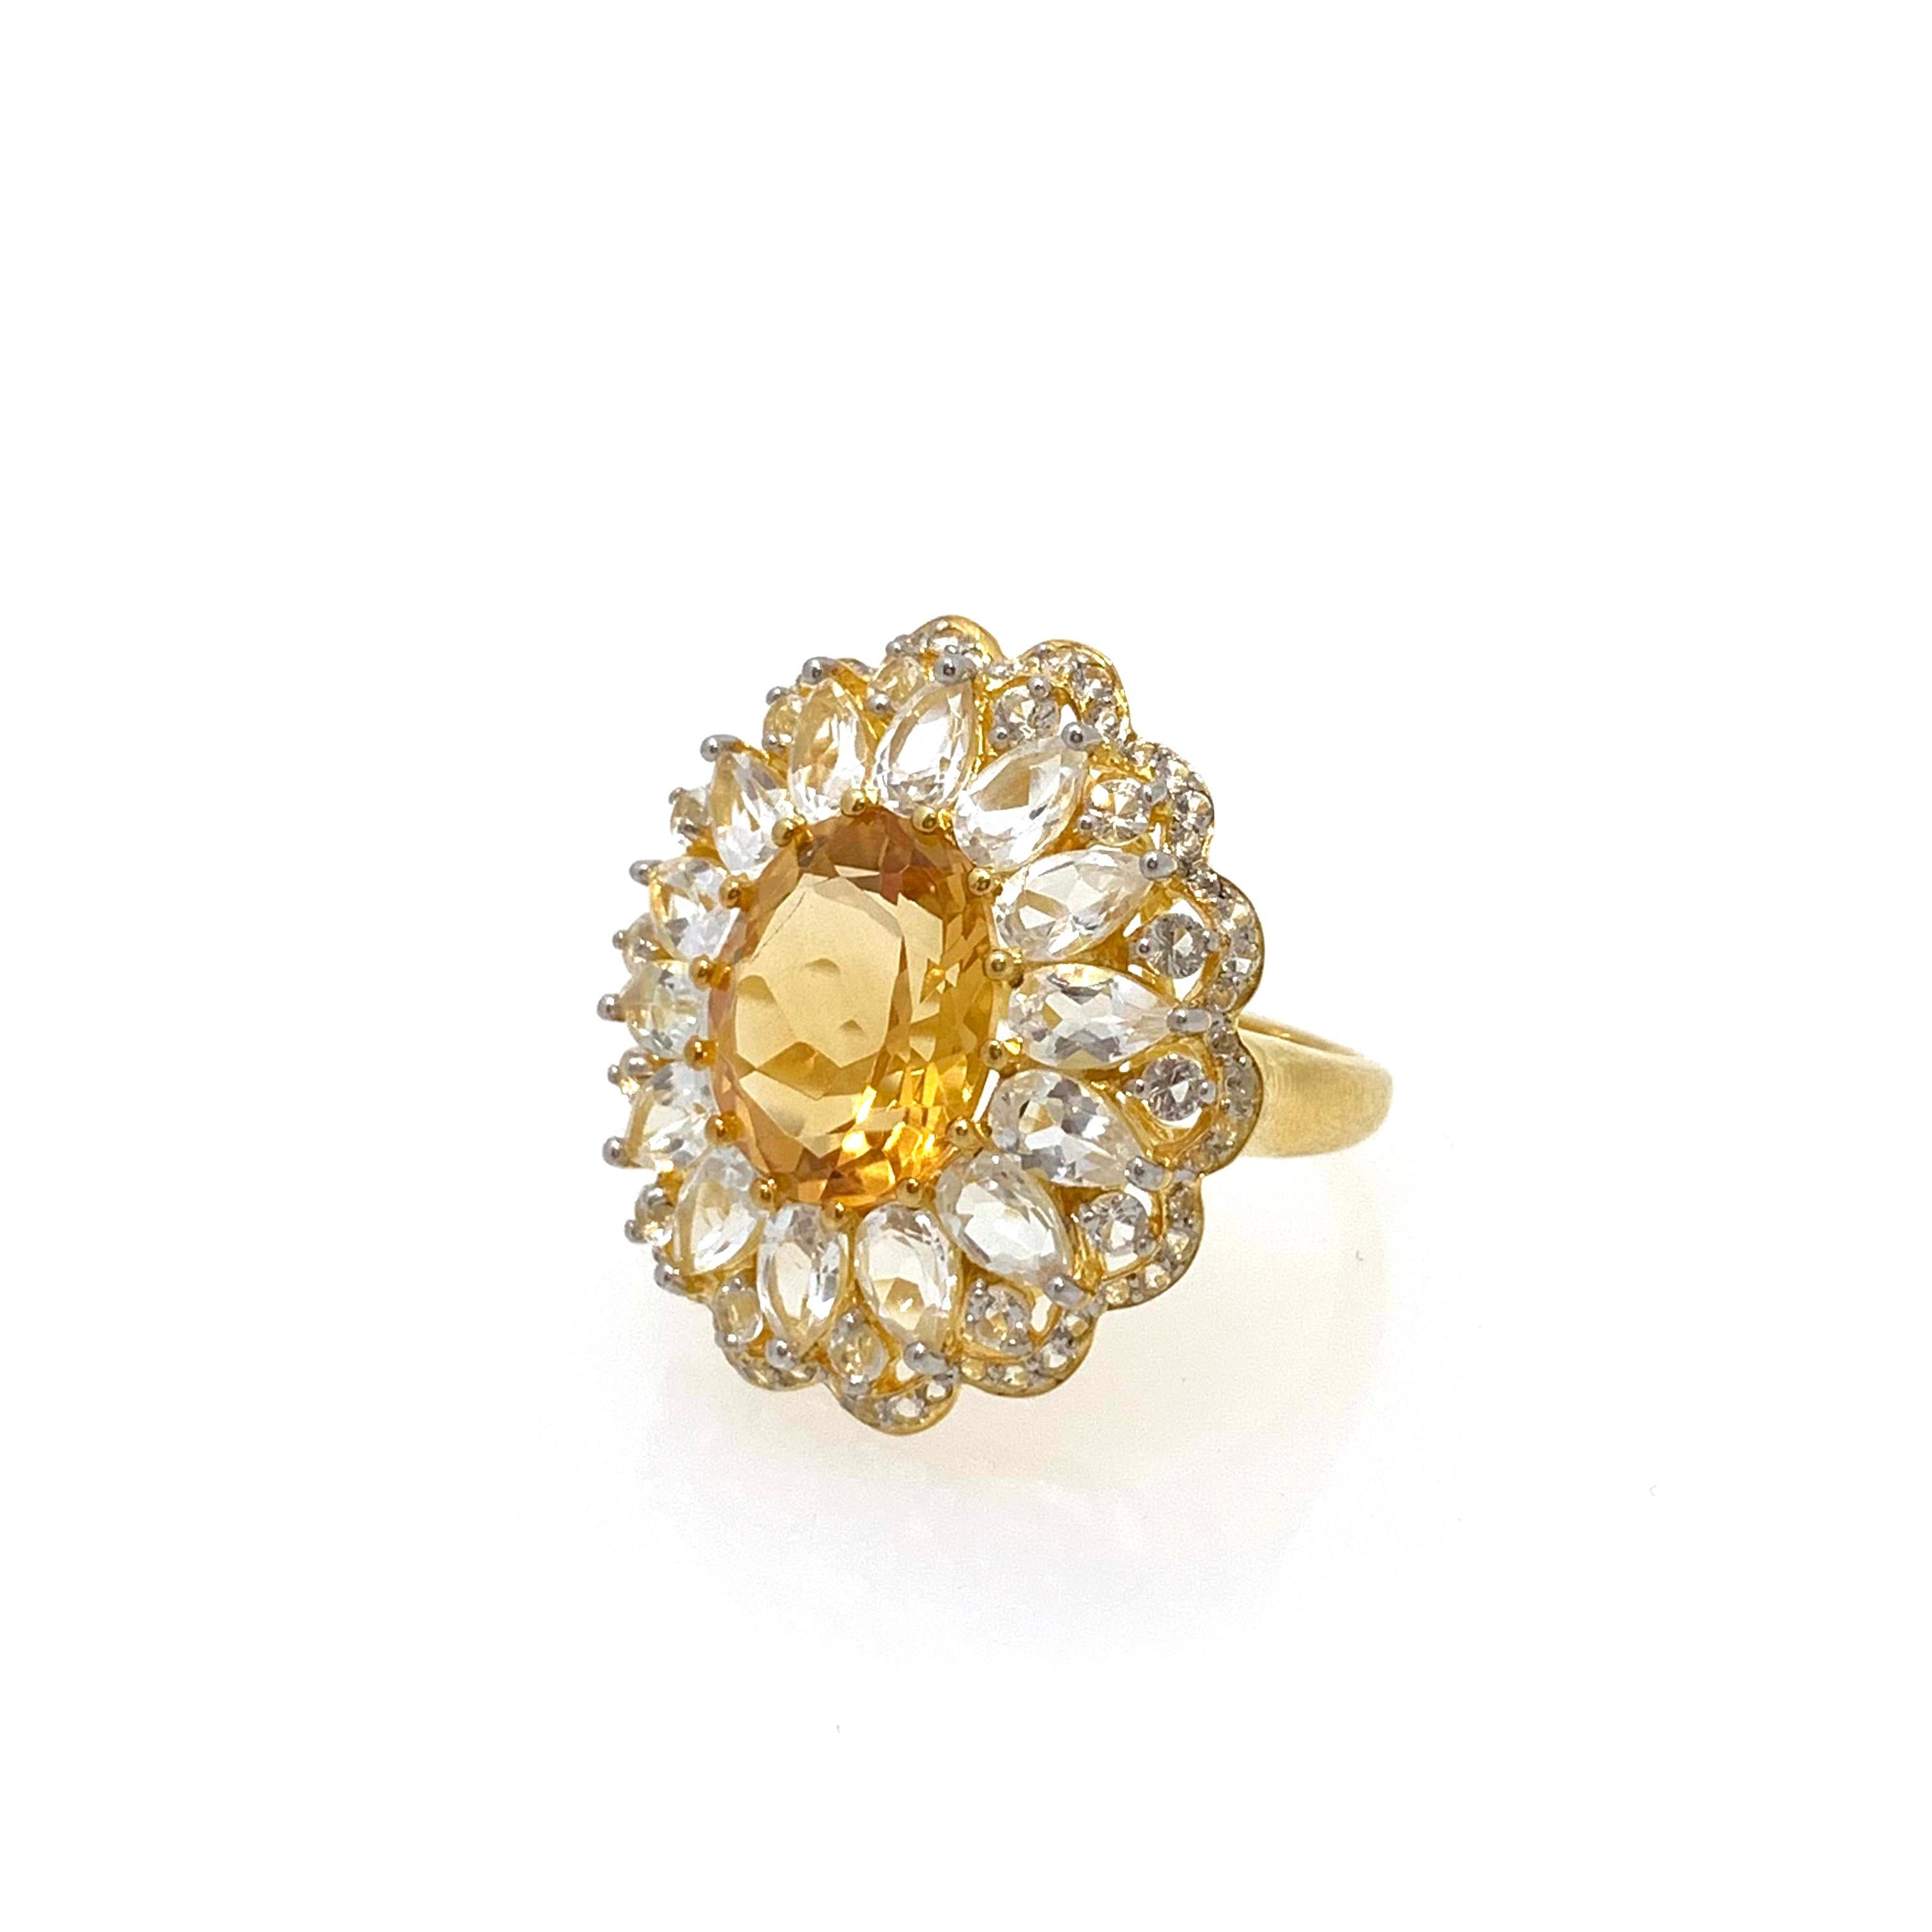 Bijoux Num Oval Citrine and White Topaz Cocktail Ring

This bold cocktail ring features beautiful round Brazilian citrine, surrounded with  pear shape and round white topaz, handset in 18k yellow gold vermeil over sterling silver. The sparkles from